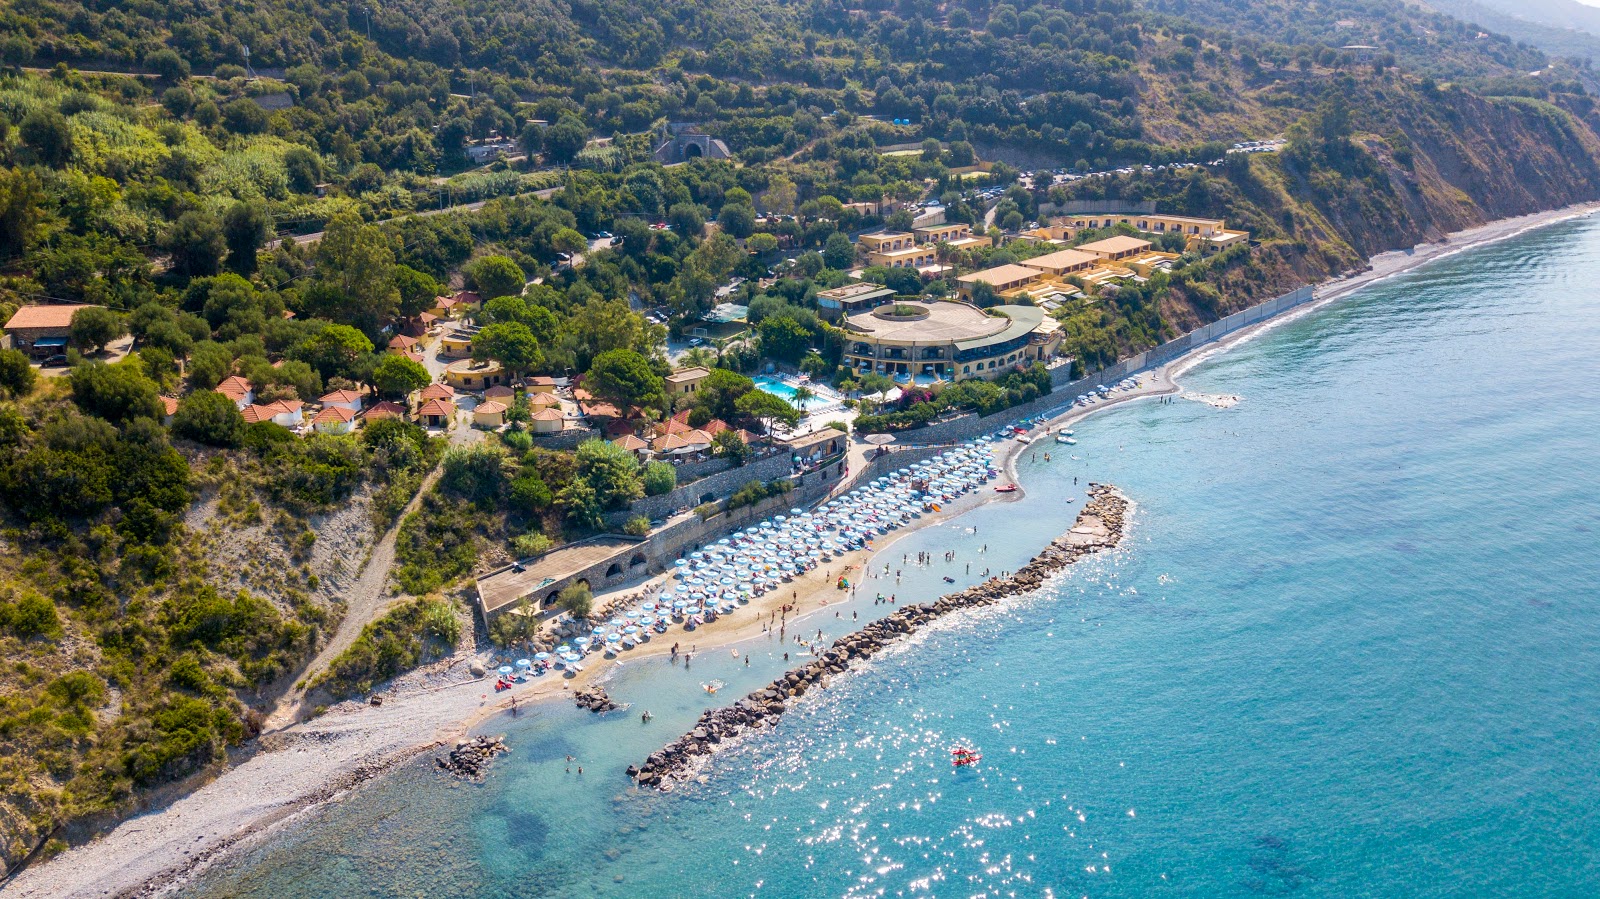 Photo of La Marée hotel beach with blue water surface